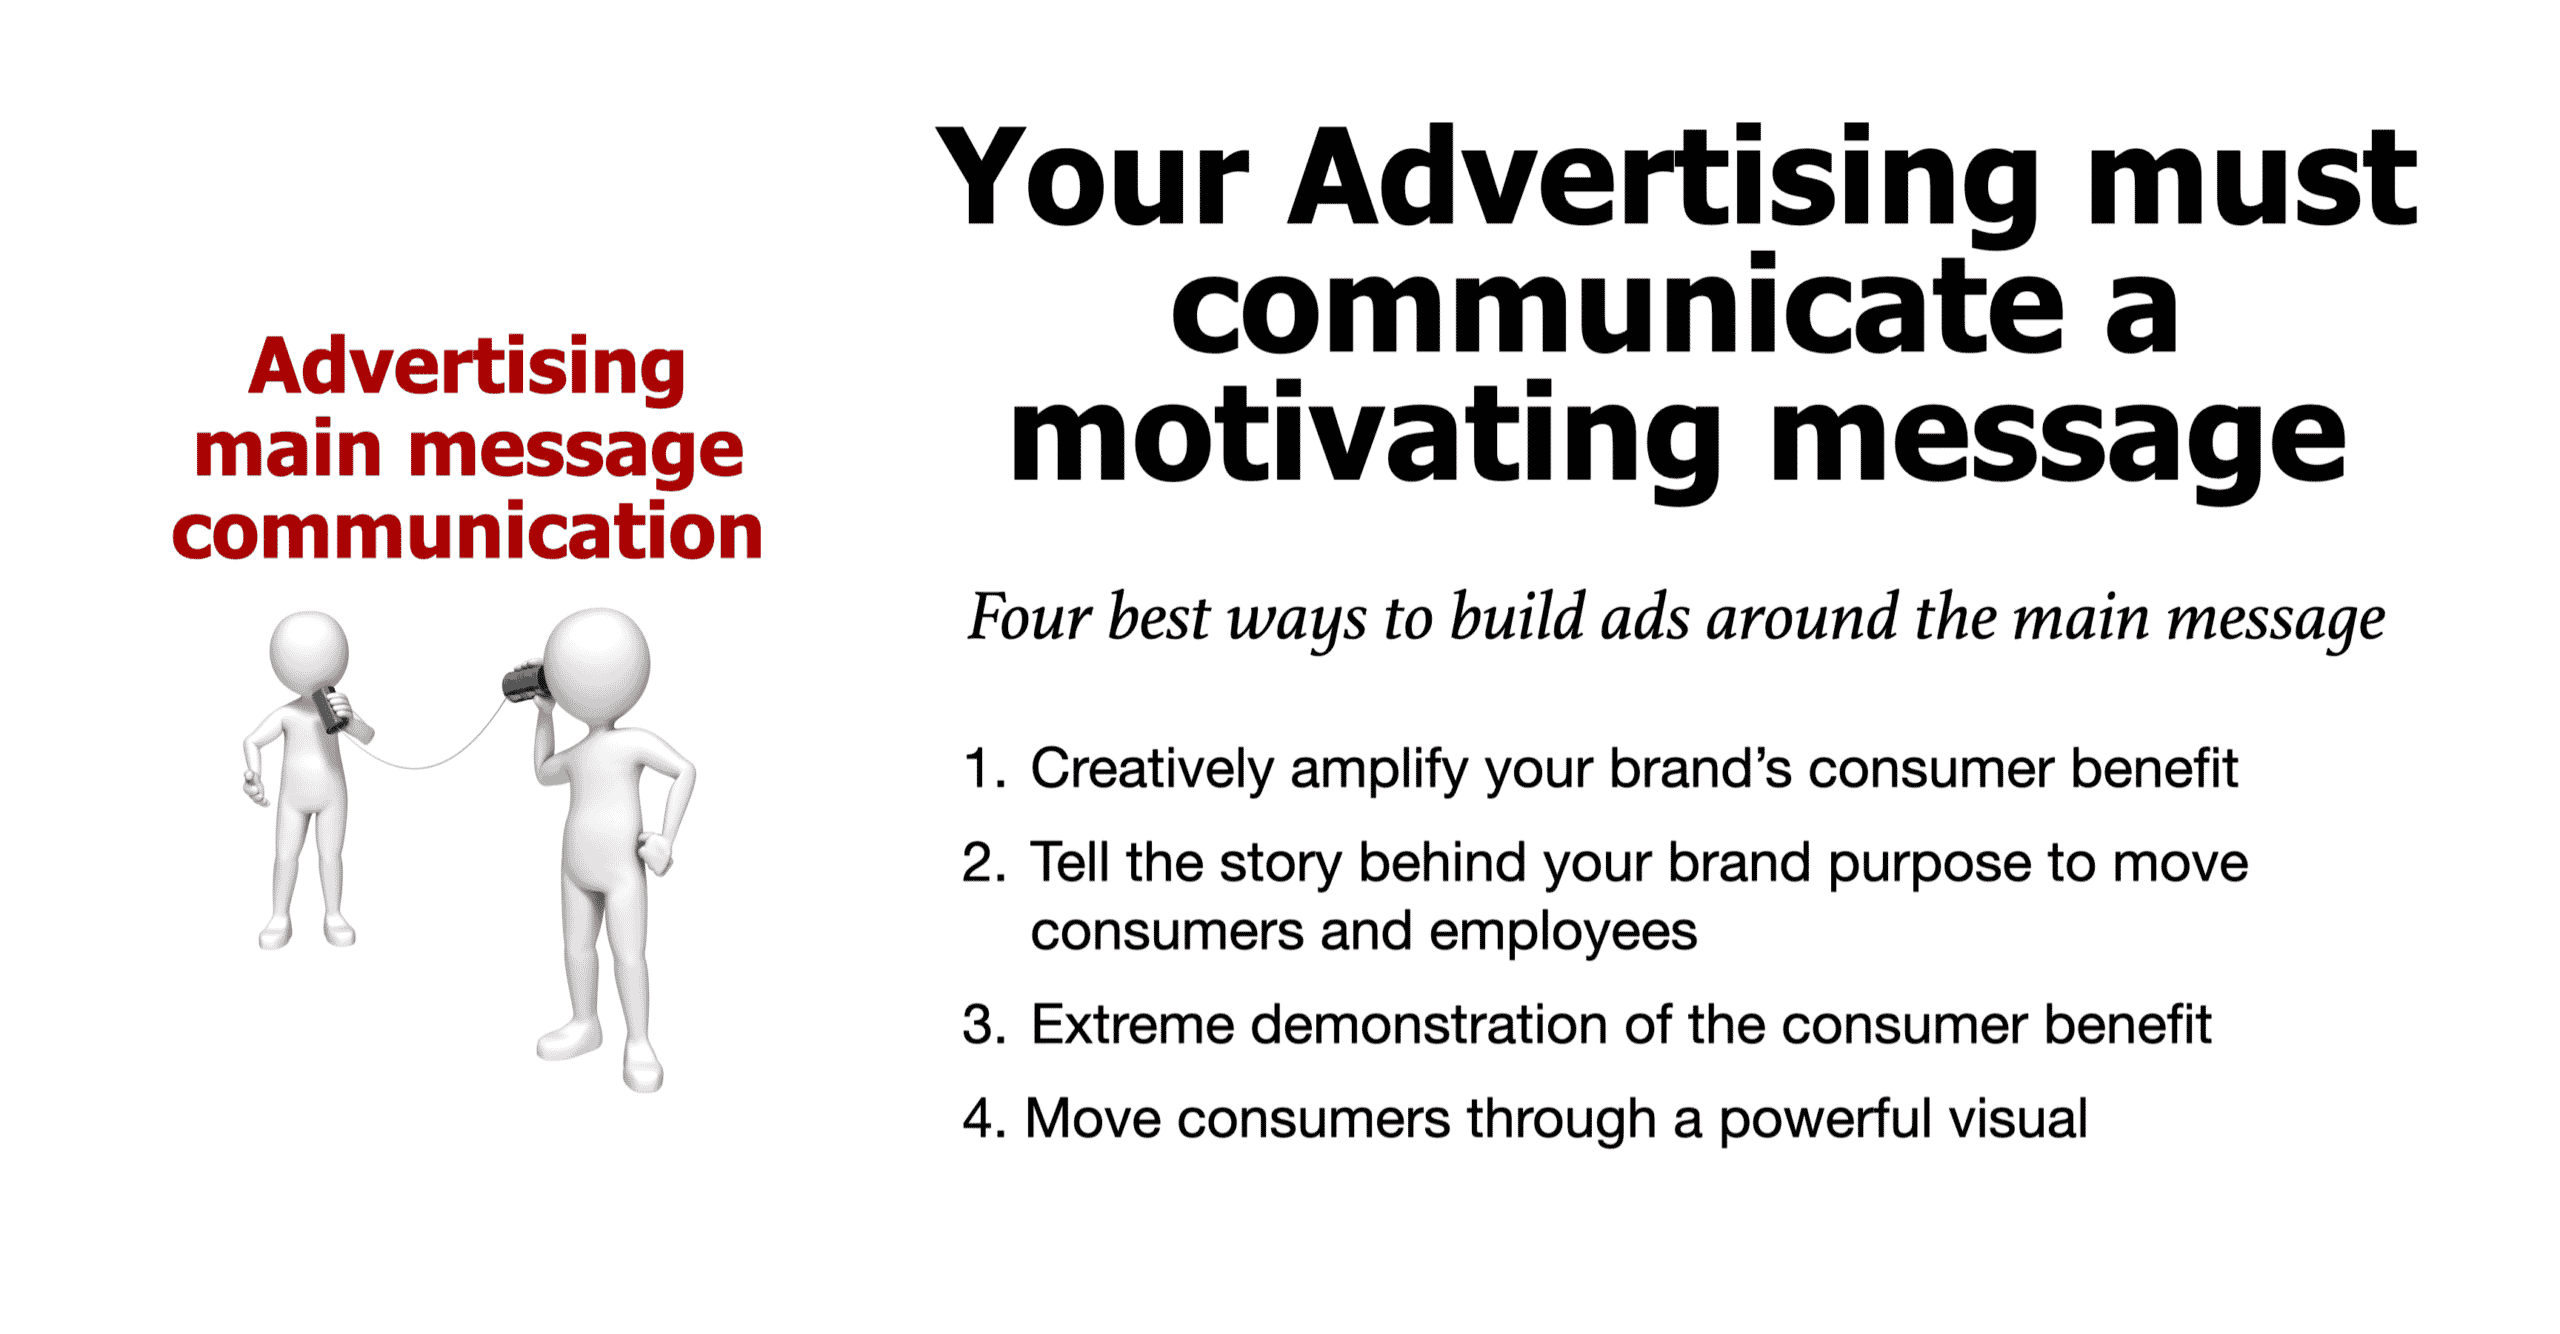 Advertising must communicate a motivating message